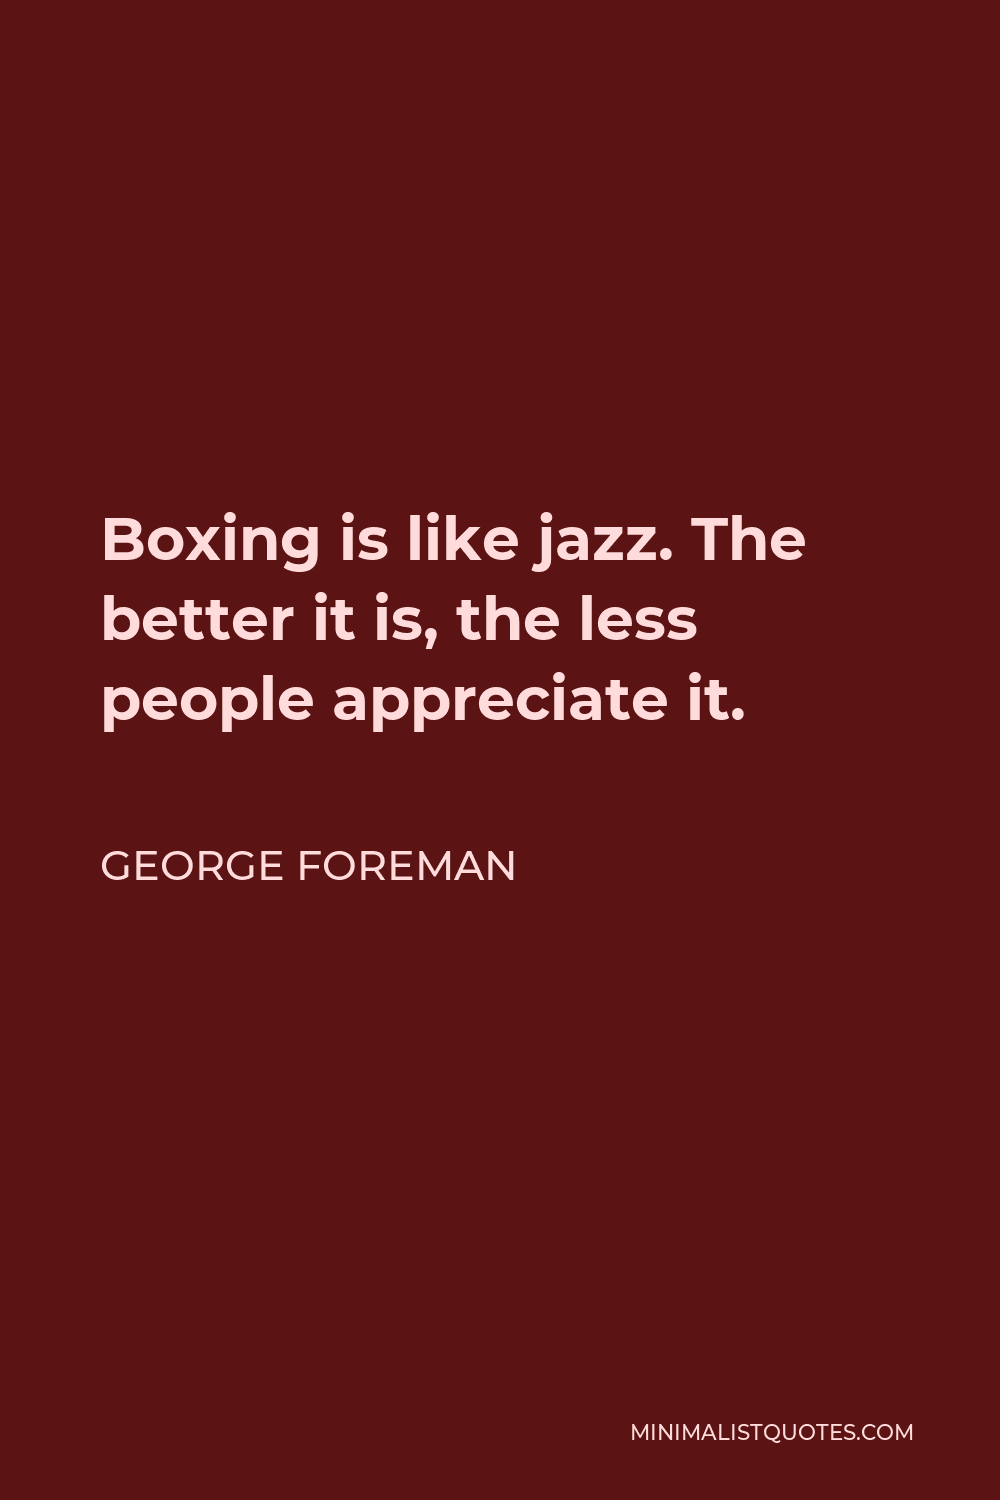 George Foreman Quote - Boxing is like jazz. The better it is, the less people appreciate it.